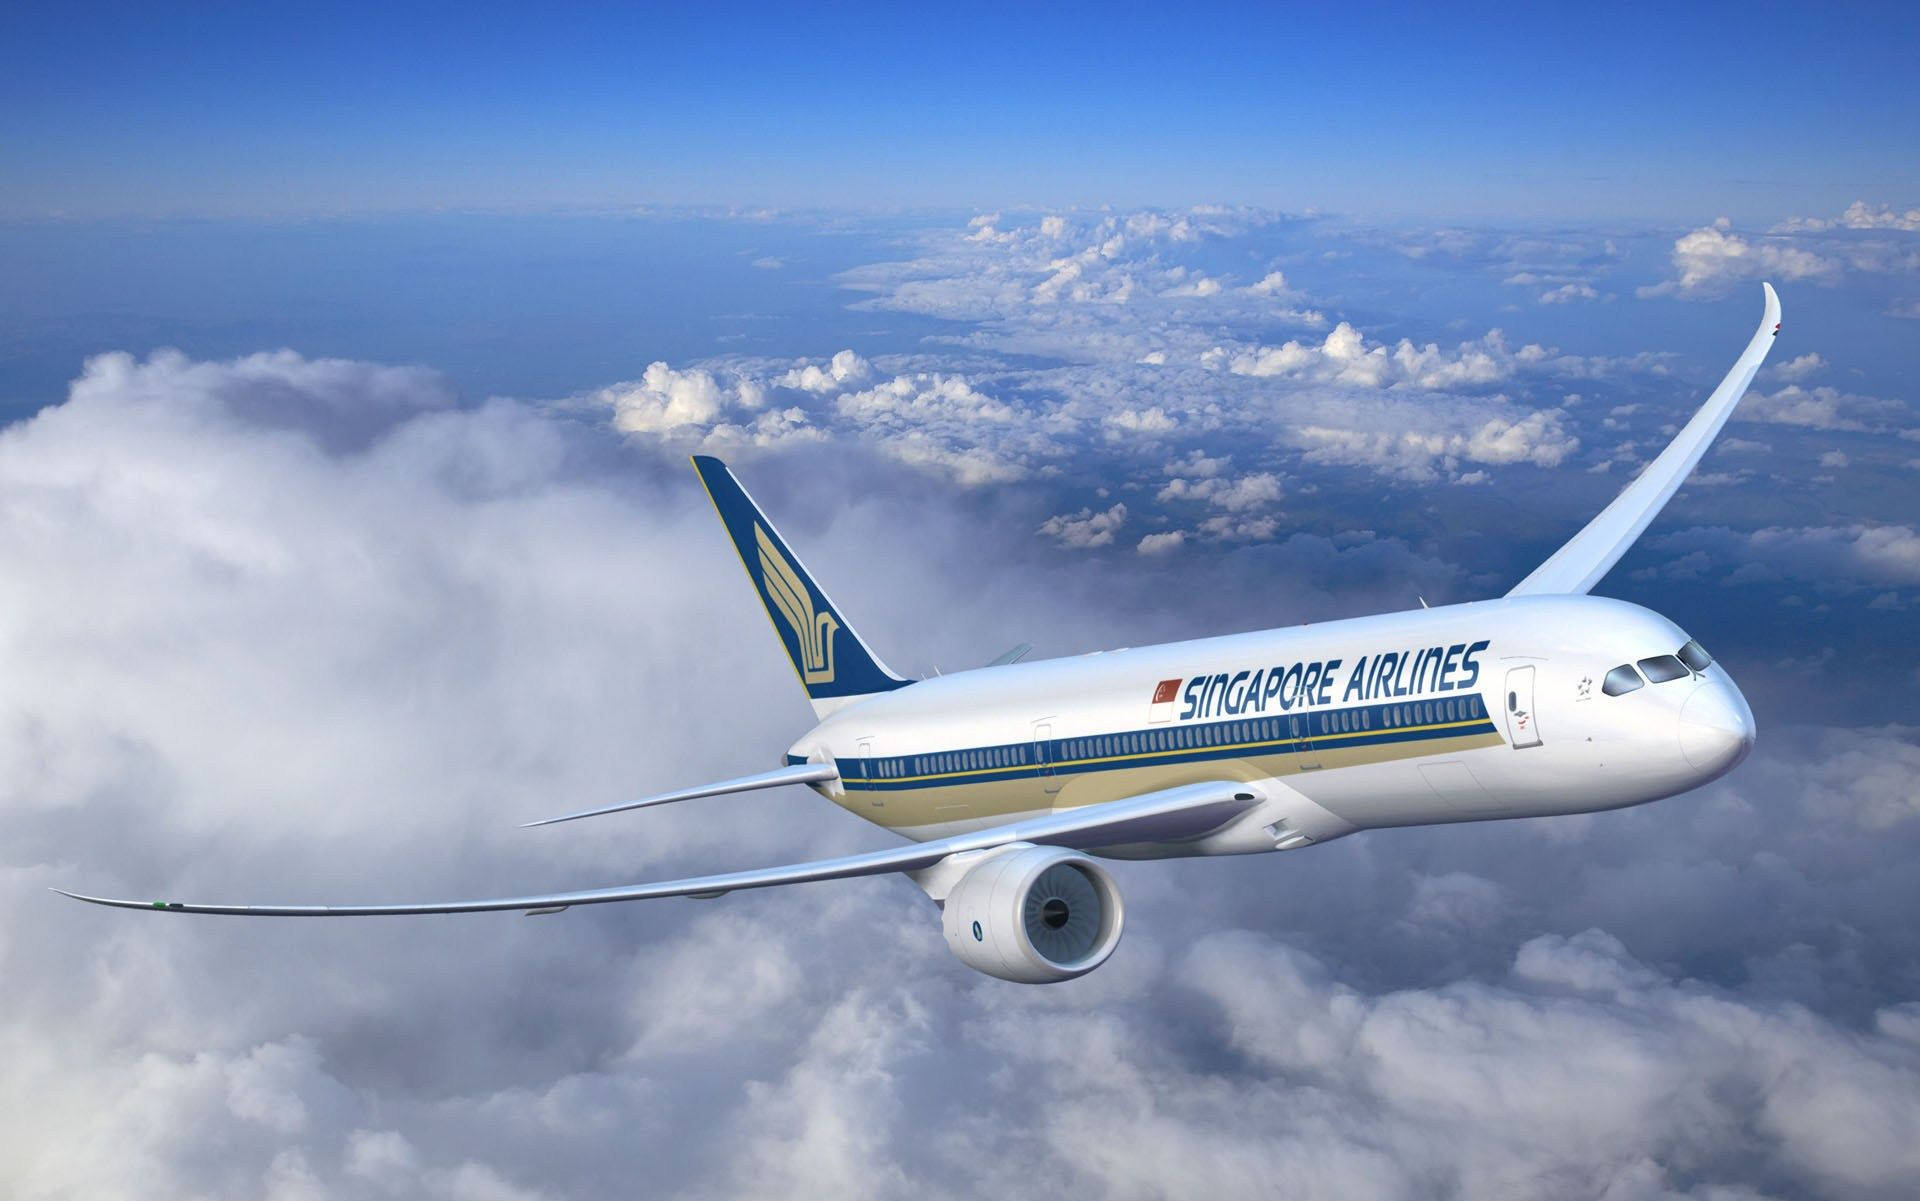 Singapore Airlines Background Wallpaper